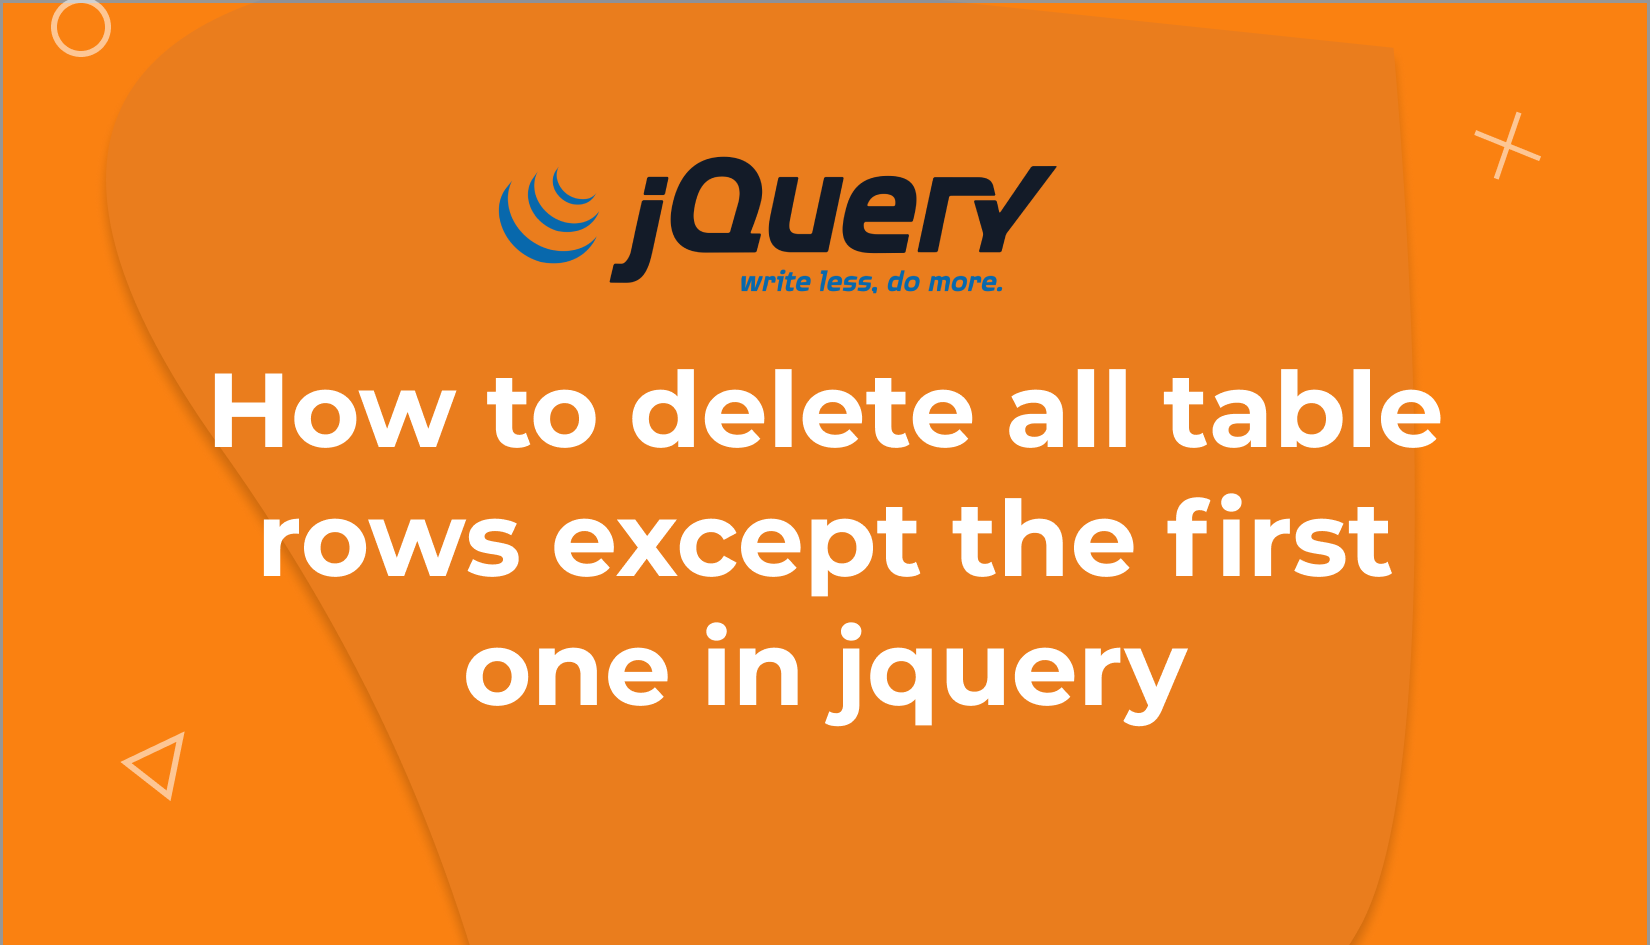 How to delete all table rows except the first one in jquery